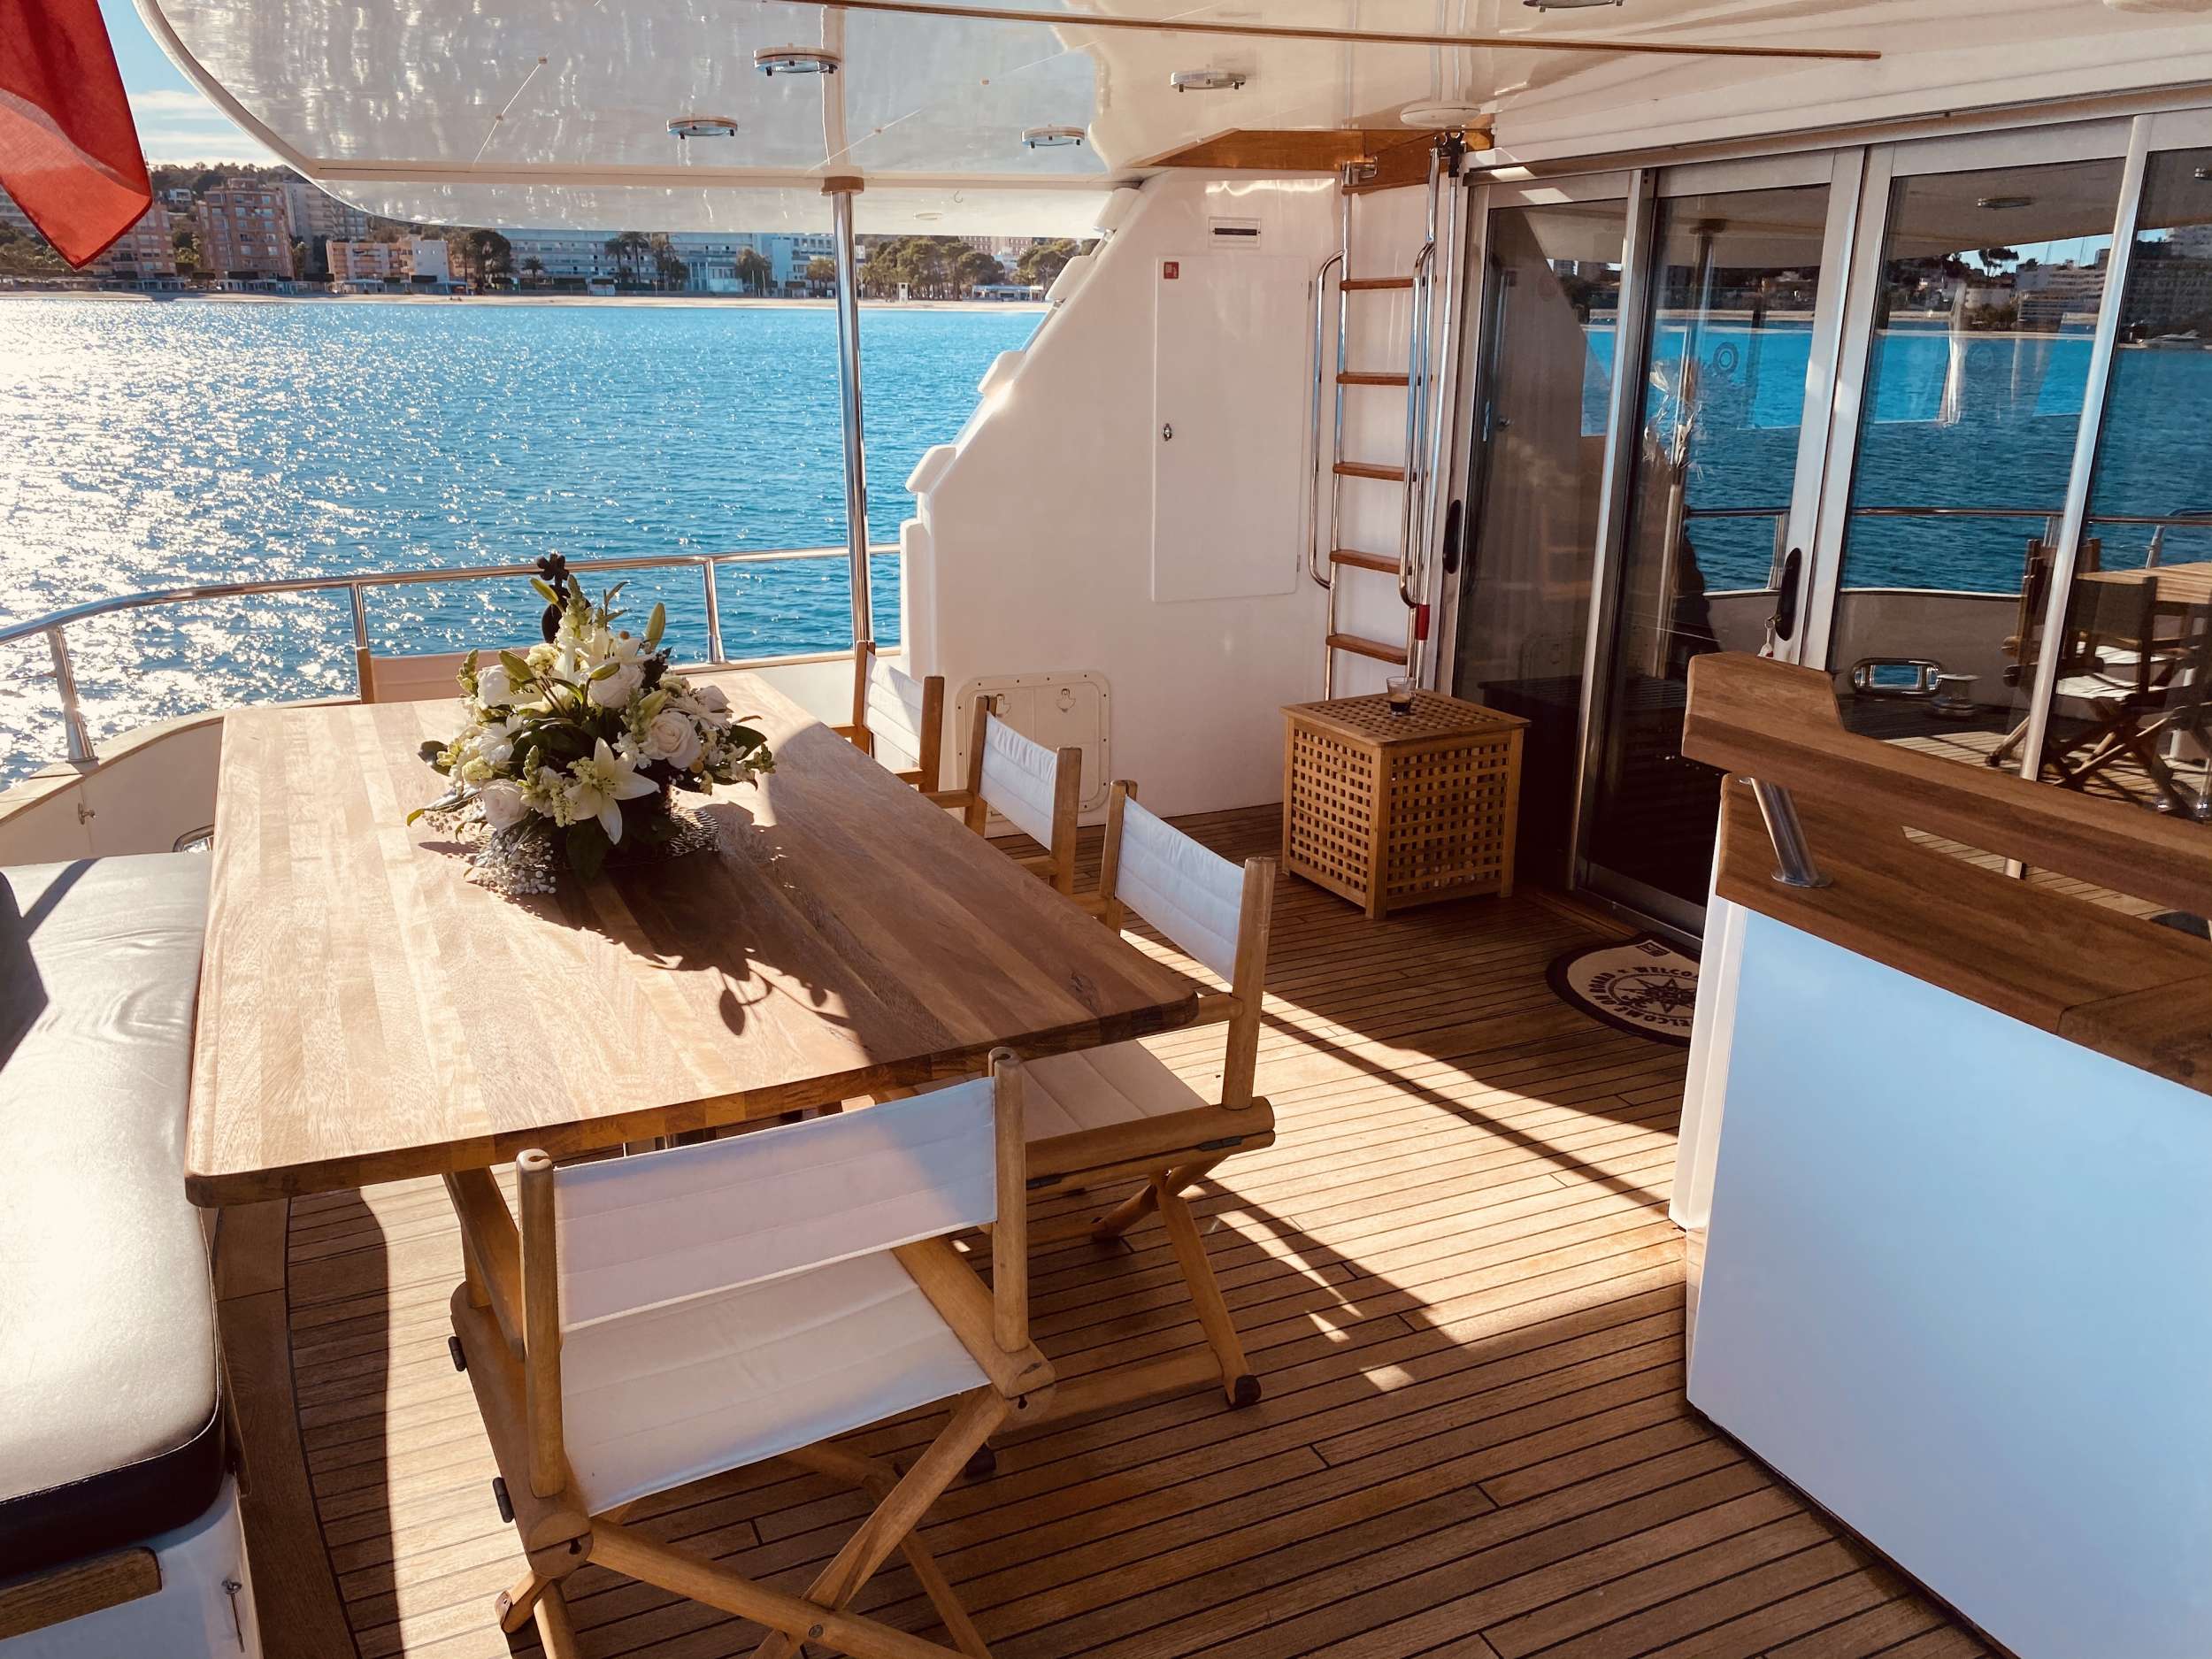 The aft cockpit accommodates 11 guests comfortably and also has an outside bar